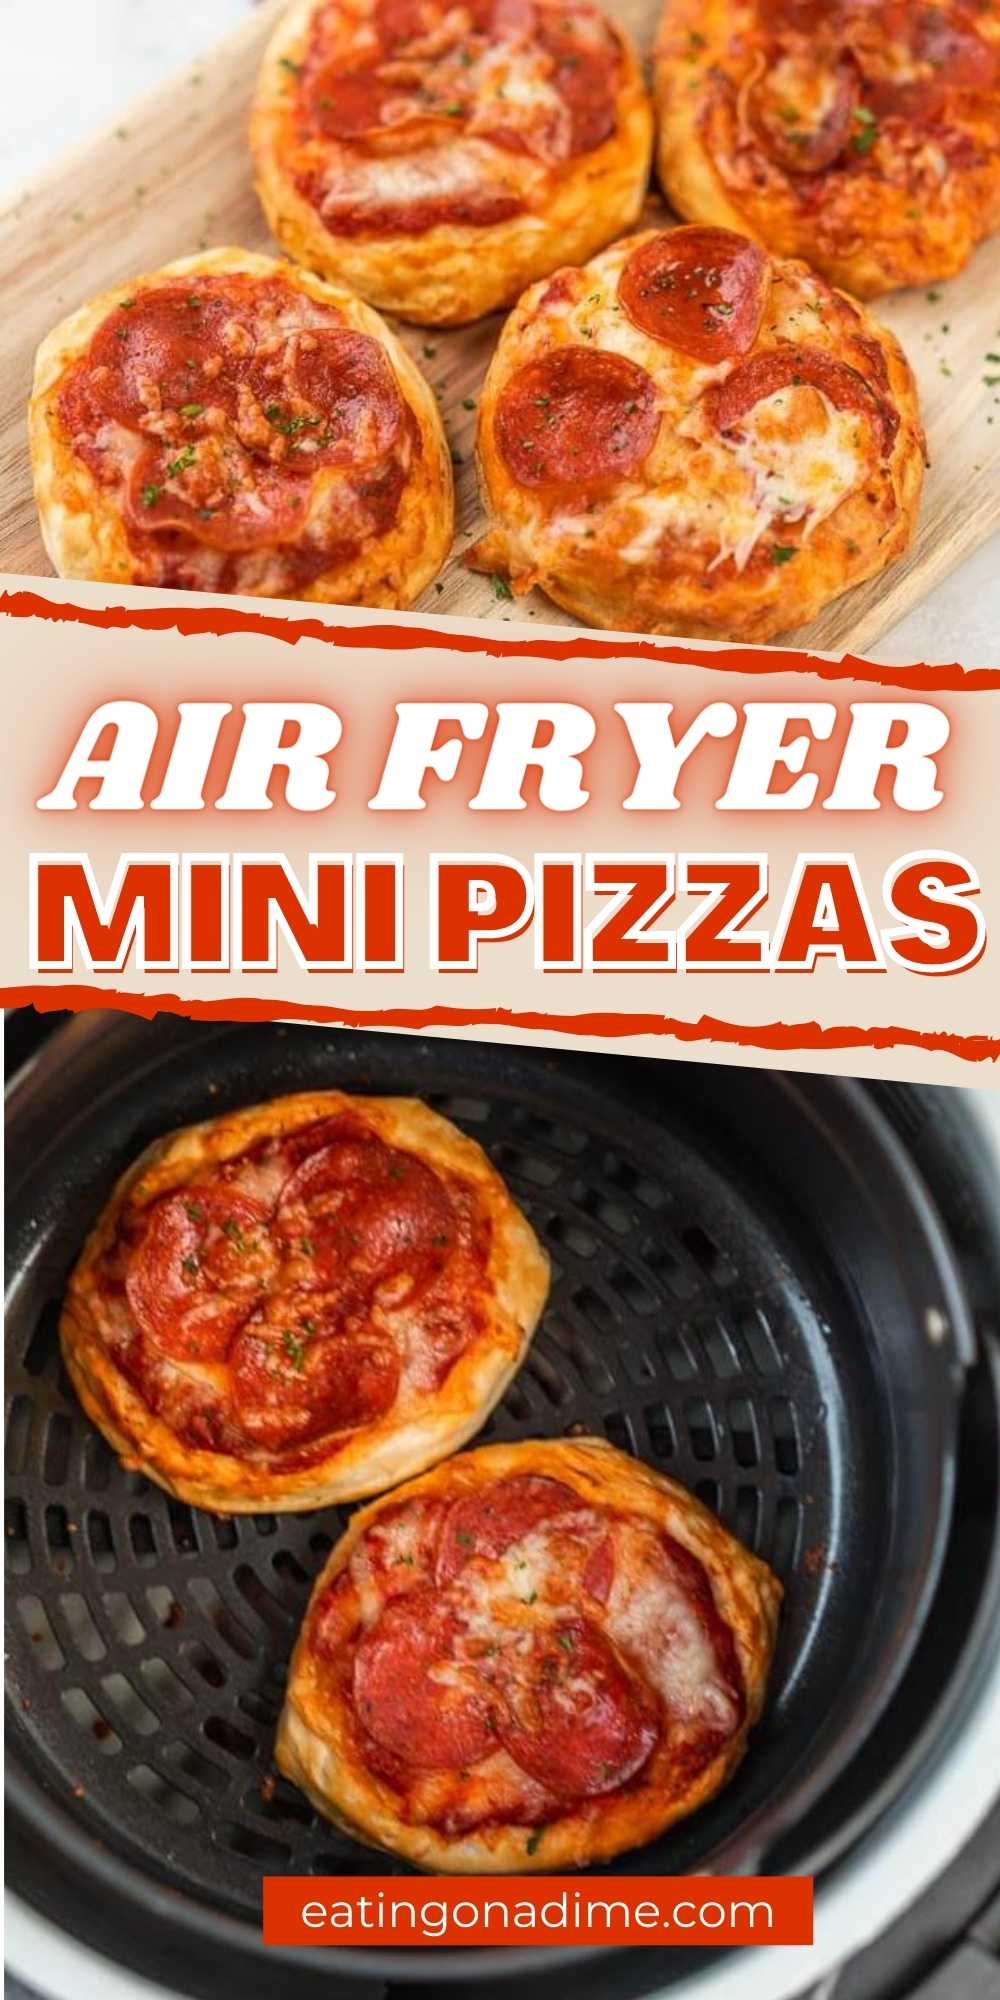 Air Fryer Pizzas are delicious and crispy plus super easy to make! You’ll love these air fryer mini pizzas mad with biscuits.  They are the best and simple to throw together in a few minutes too.  You’ll love this easy air fryer recipe.  #eatingonadime #airfryerrecipes #pizzarecipes 
